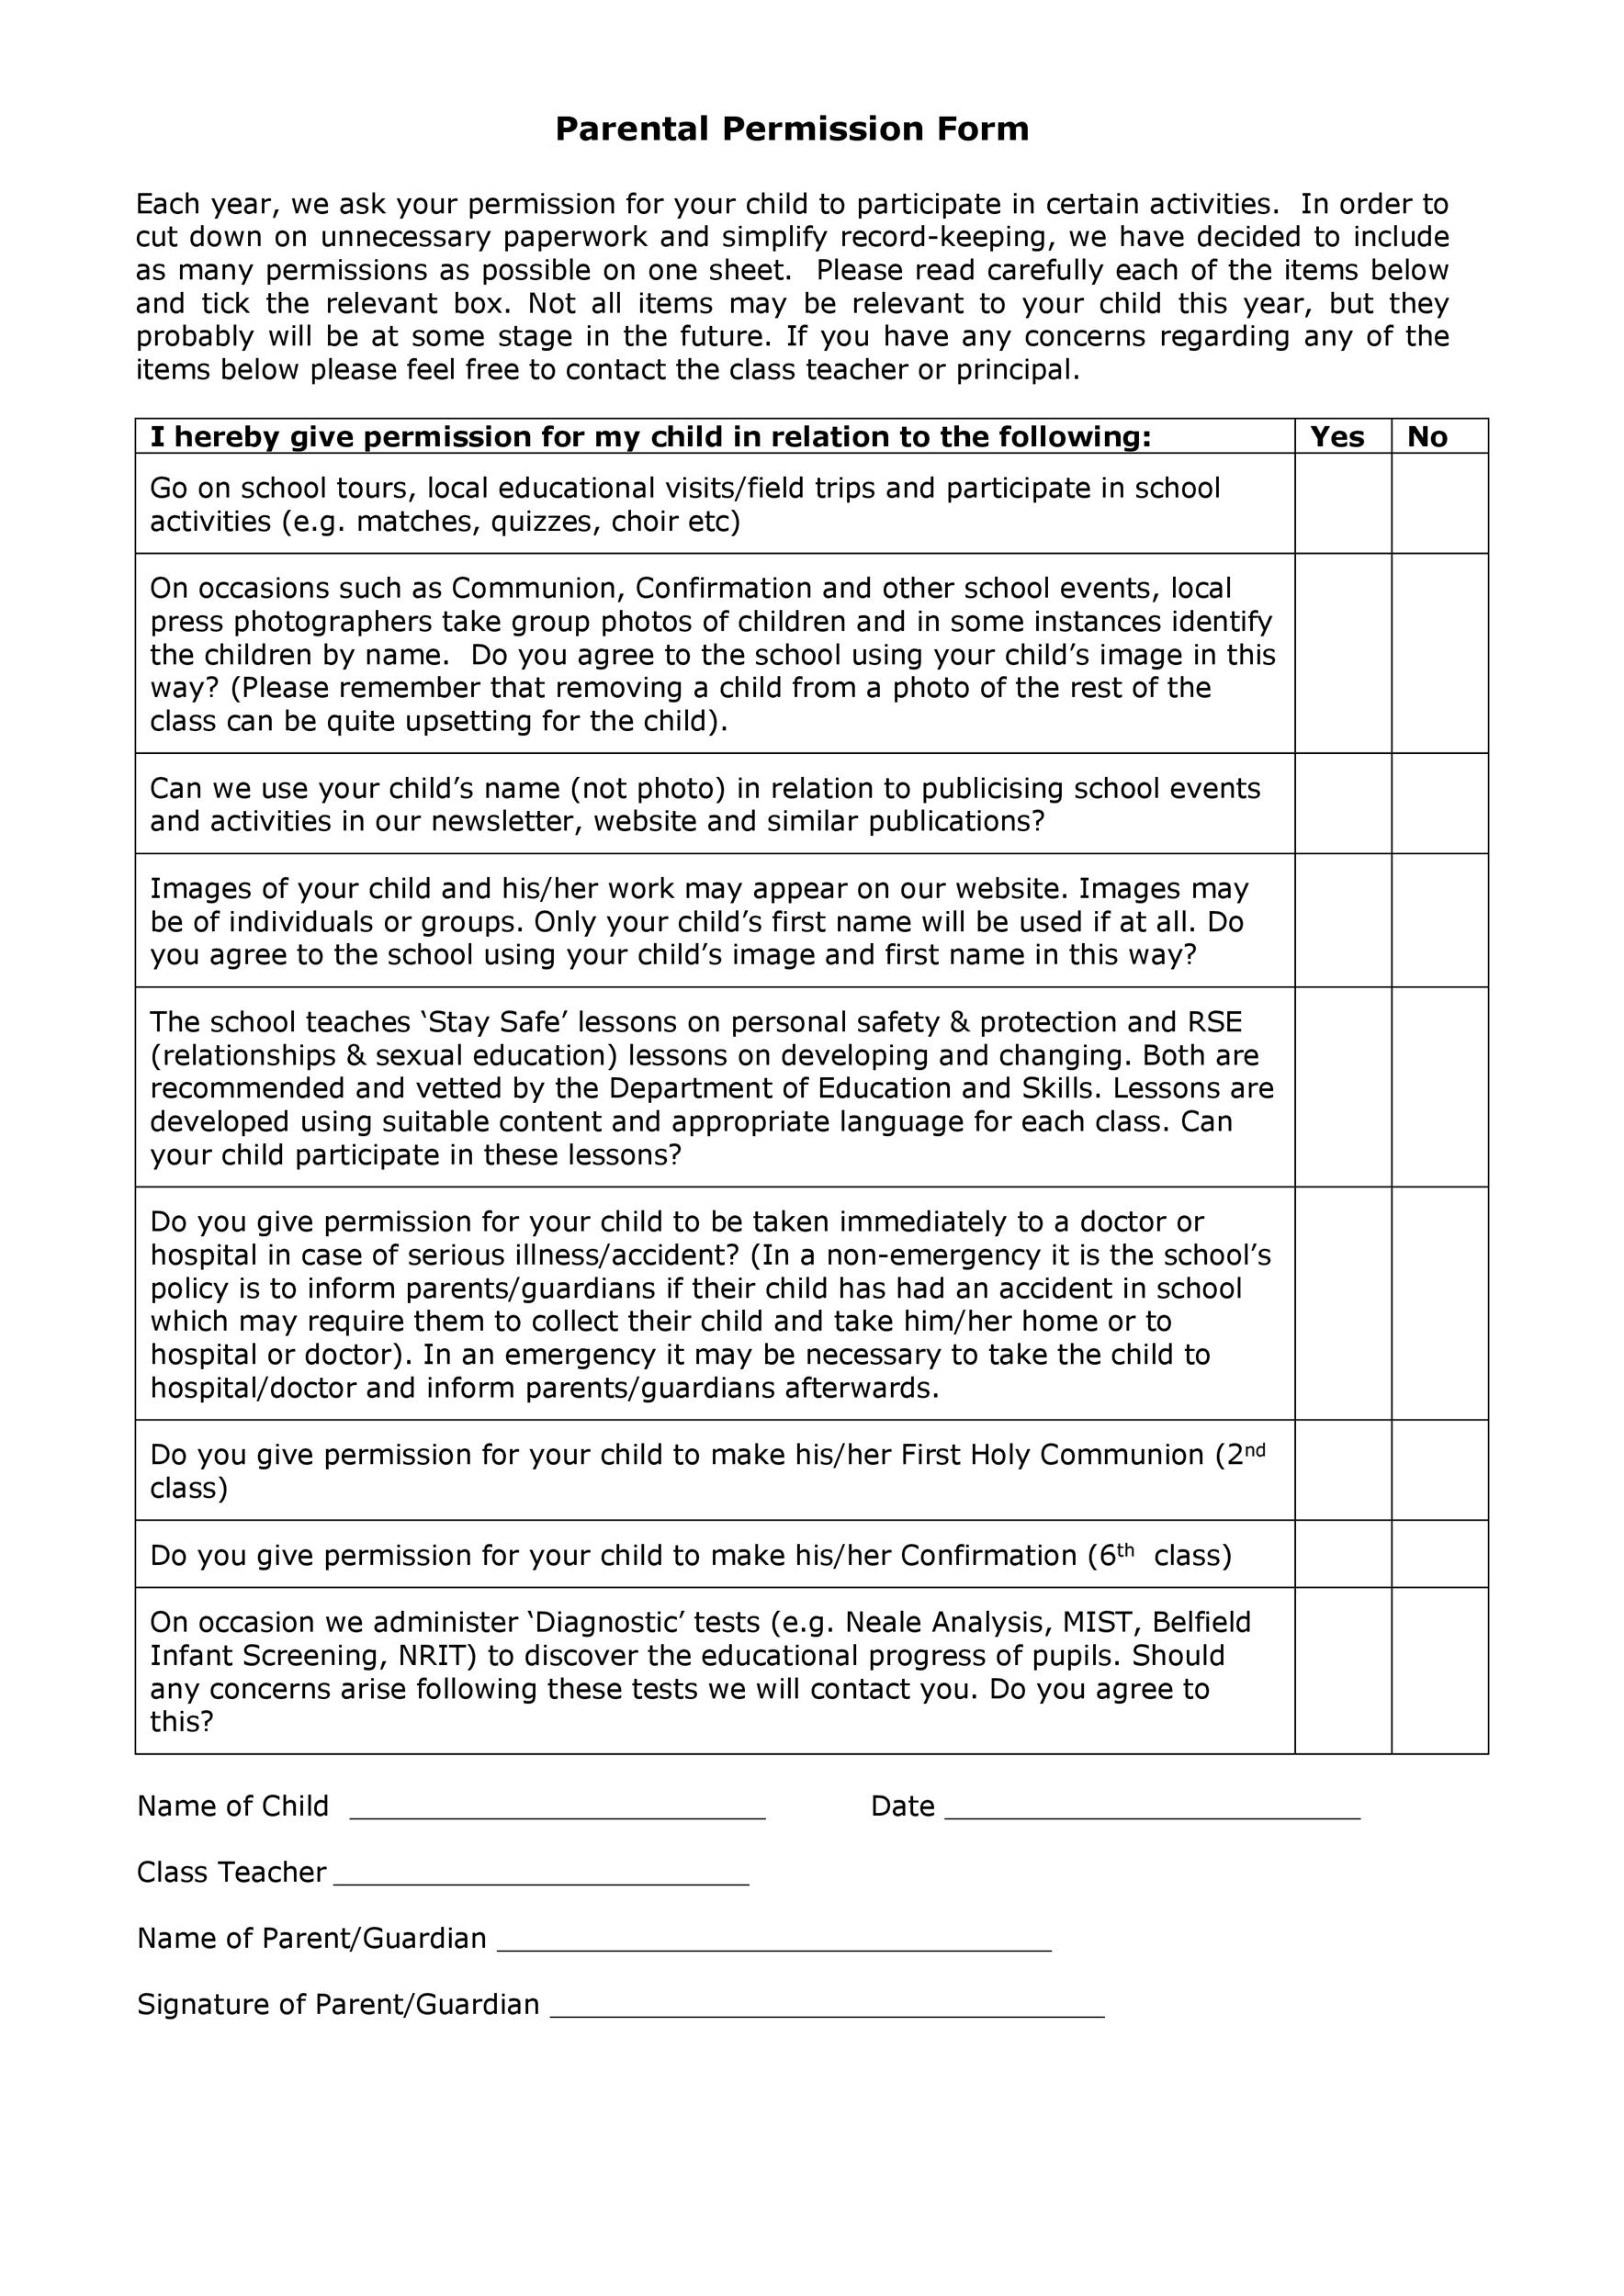 Free parental consent form template 19